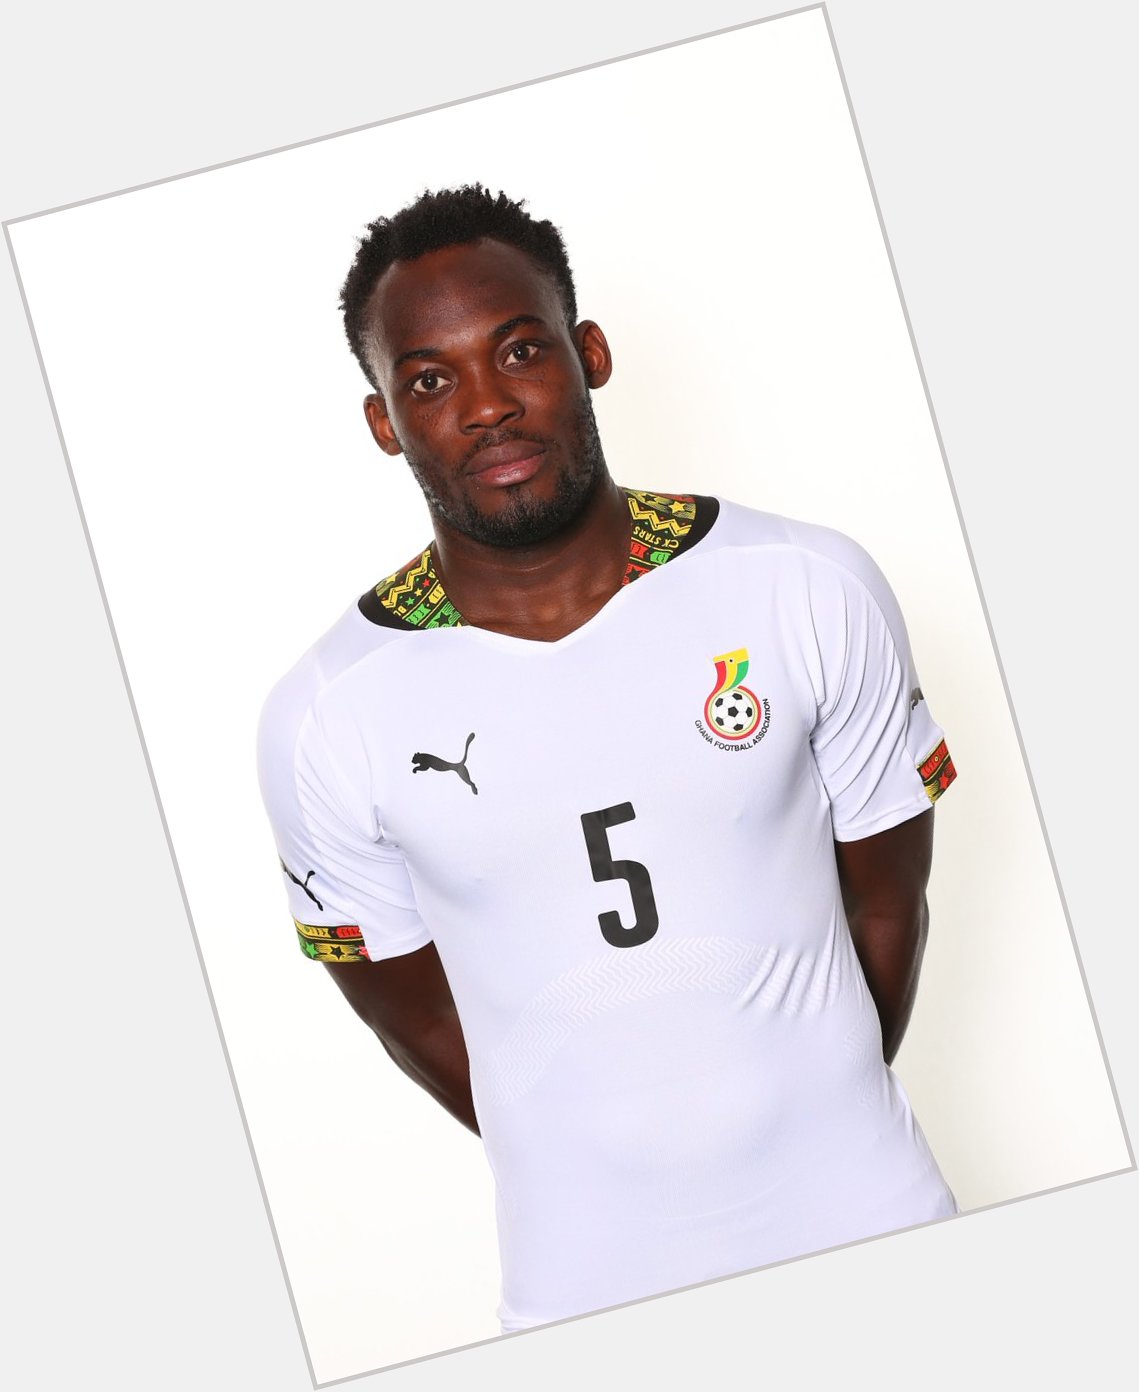 Happy birthday to Michael Essien. He turns 38 years old today. We wish him long life and good health      